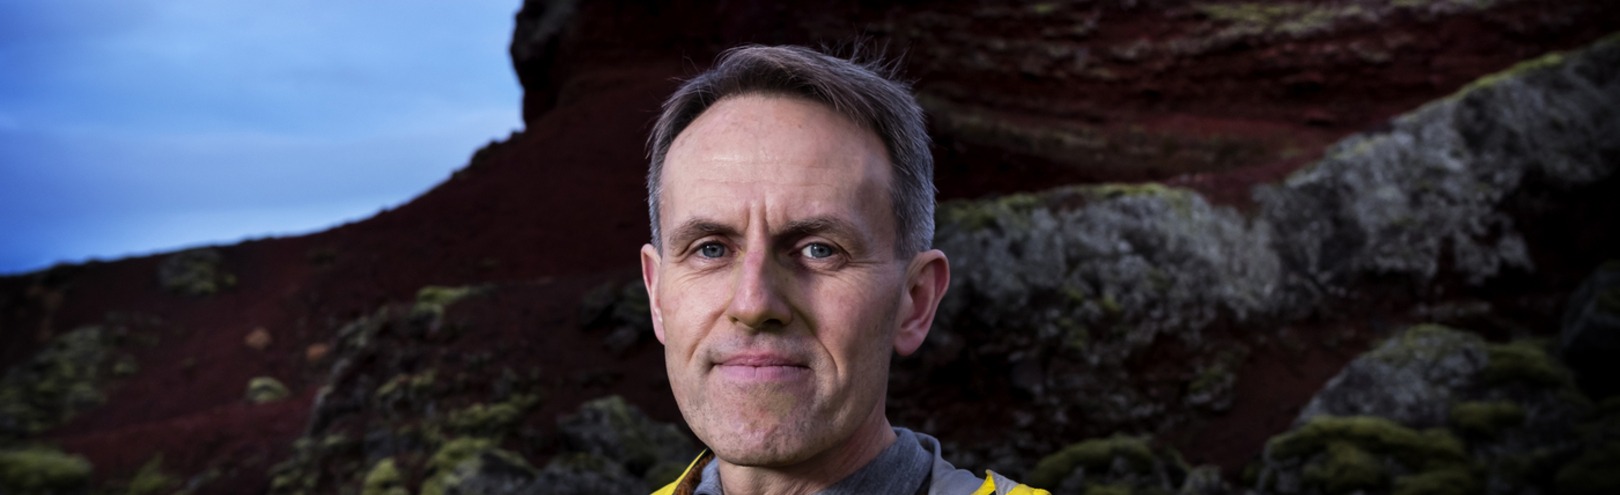 Freysteinn Sigmundsson elected as an AGU Fellow  - Available at University of Iceland